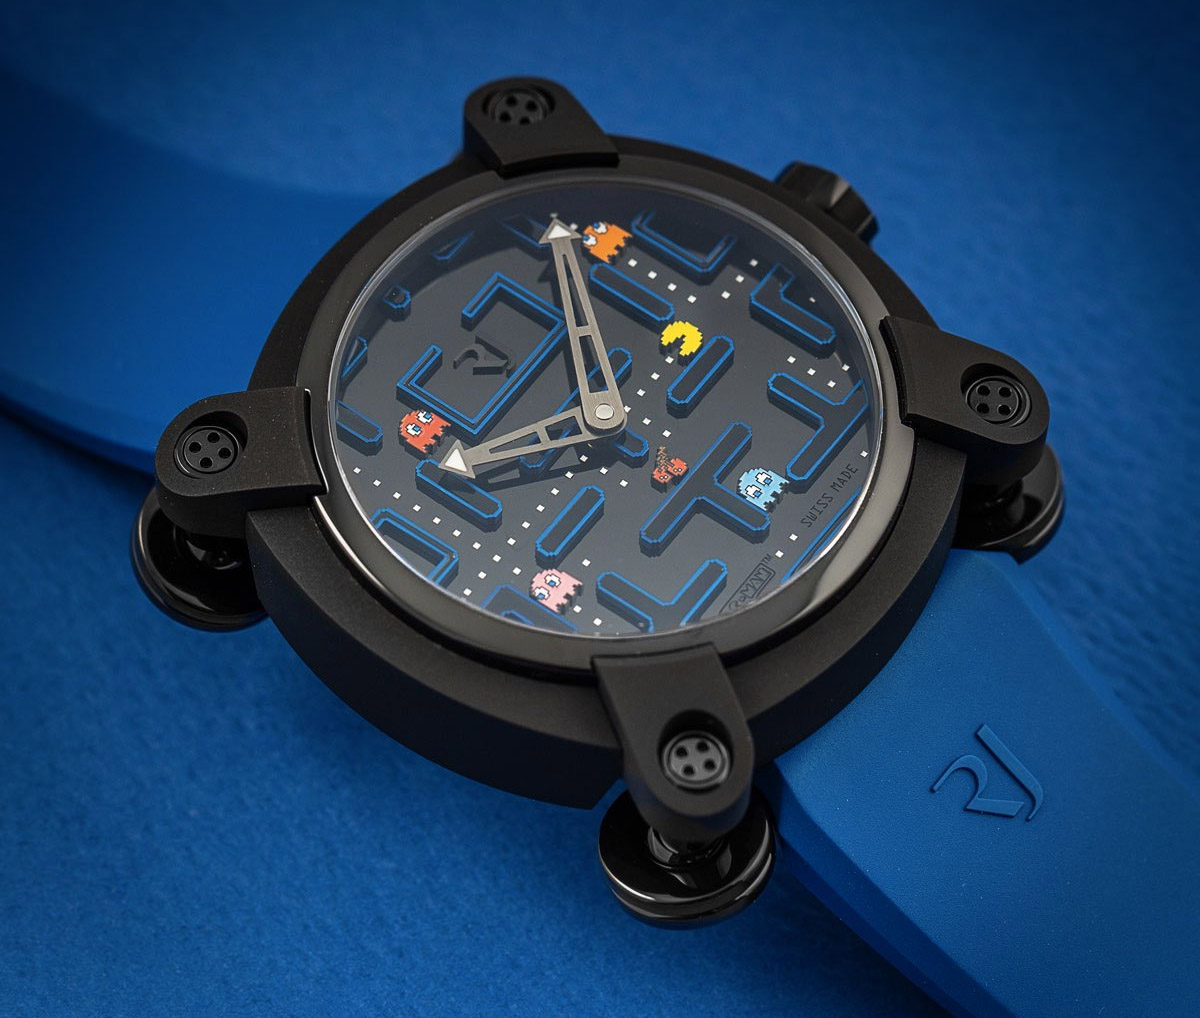 Romain Jerome The Joker Arraw Chronograph for $8,543 for sale from a  Private Seller on Chrono24